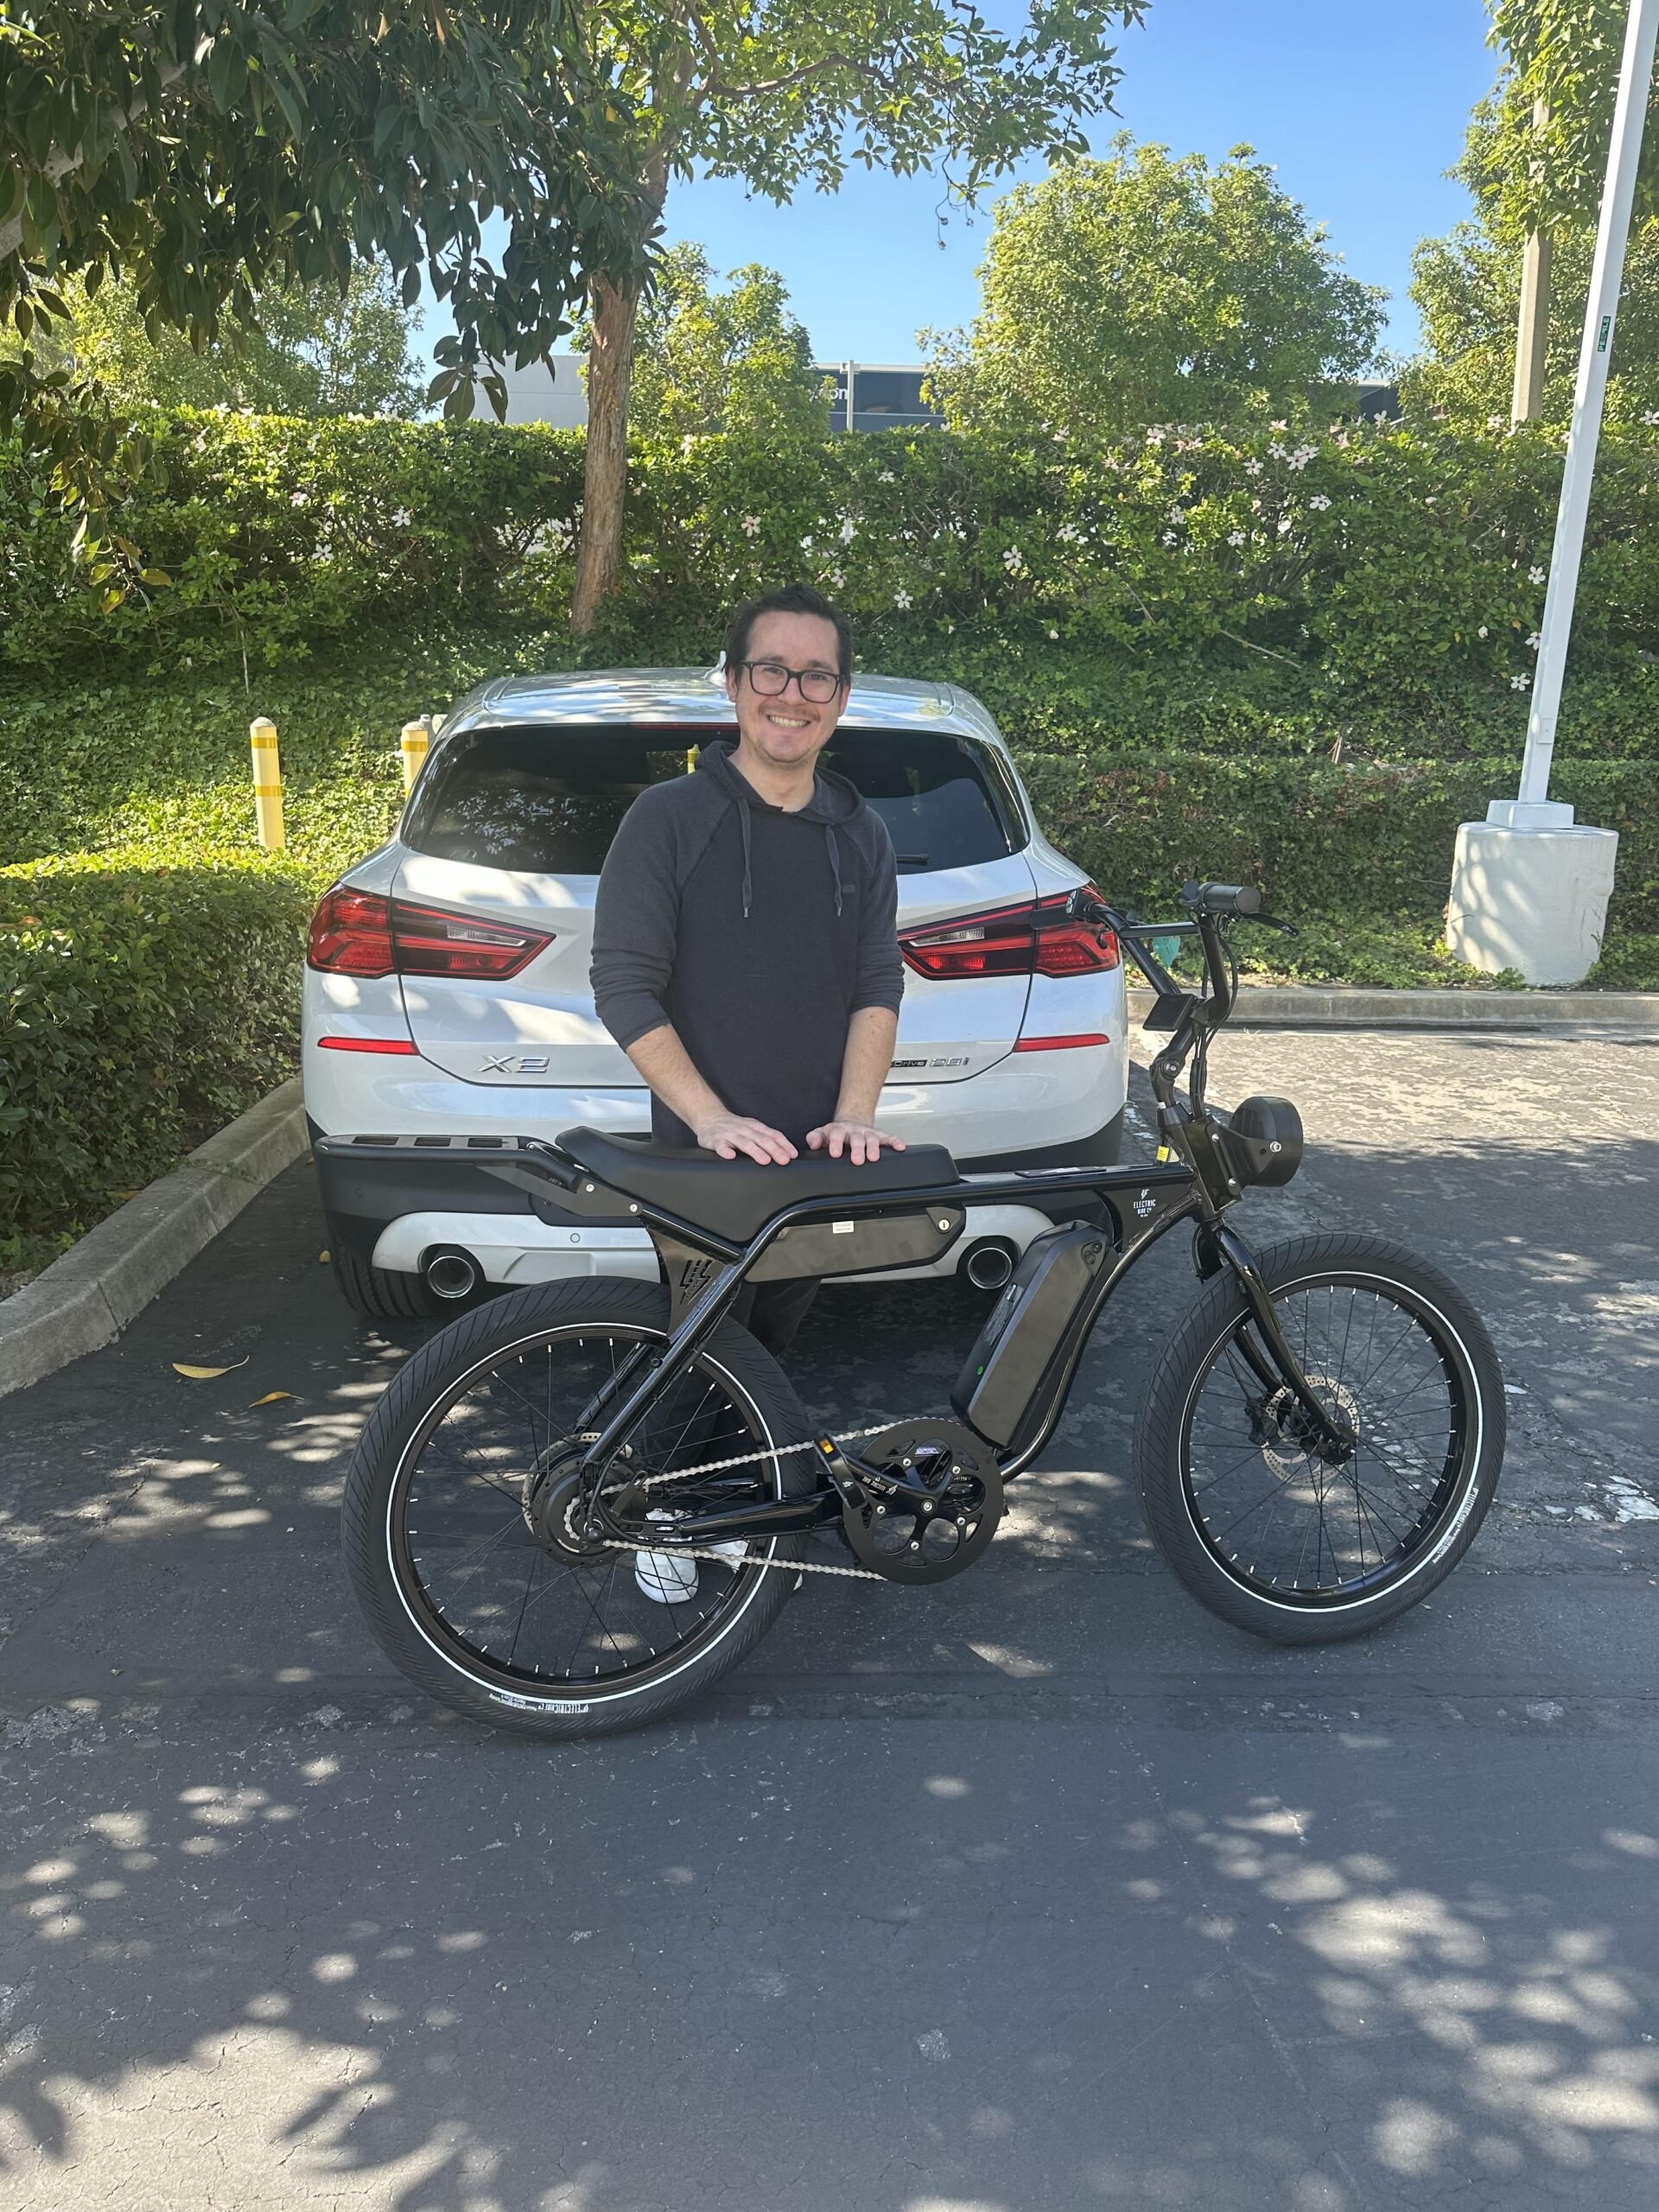 I had a seizure back in June and had my license put on hold. Getting an e-bike changed my life for the better. Here’s my new Stealth Black from ElectricBikeCompany in Newport.